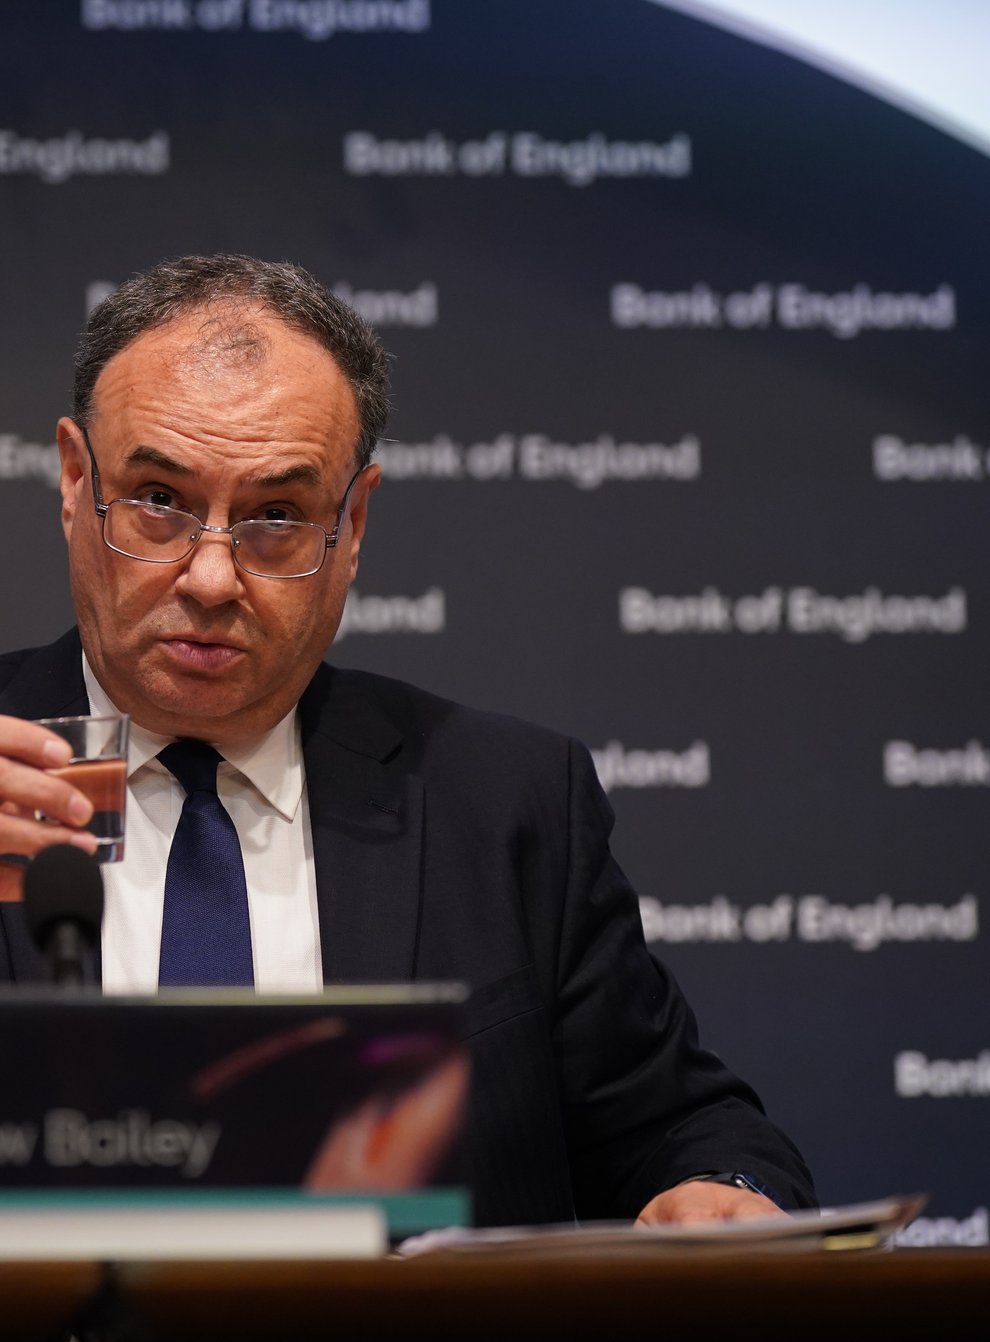 Andrew Bailey during the Bank of England’s financial stability report press conference (Yui Mok/PA)